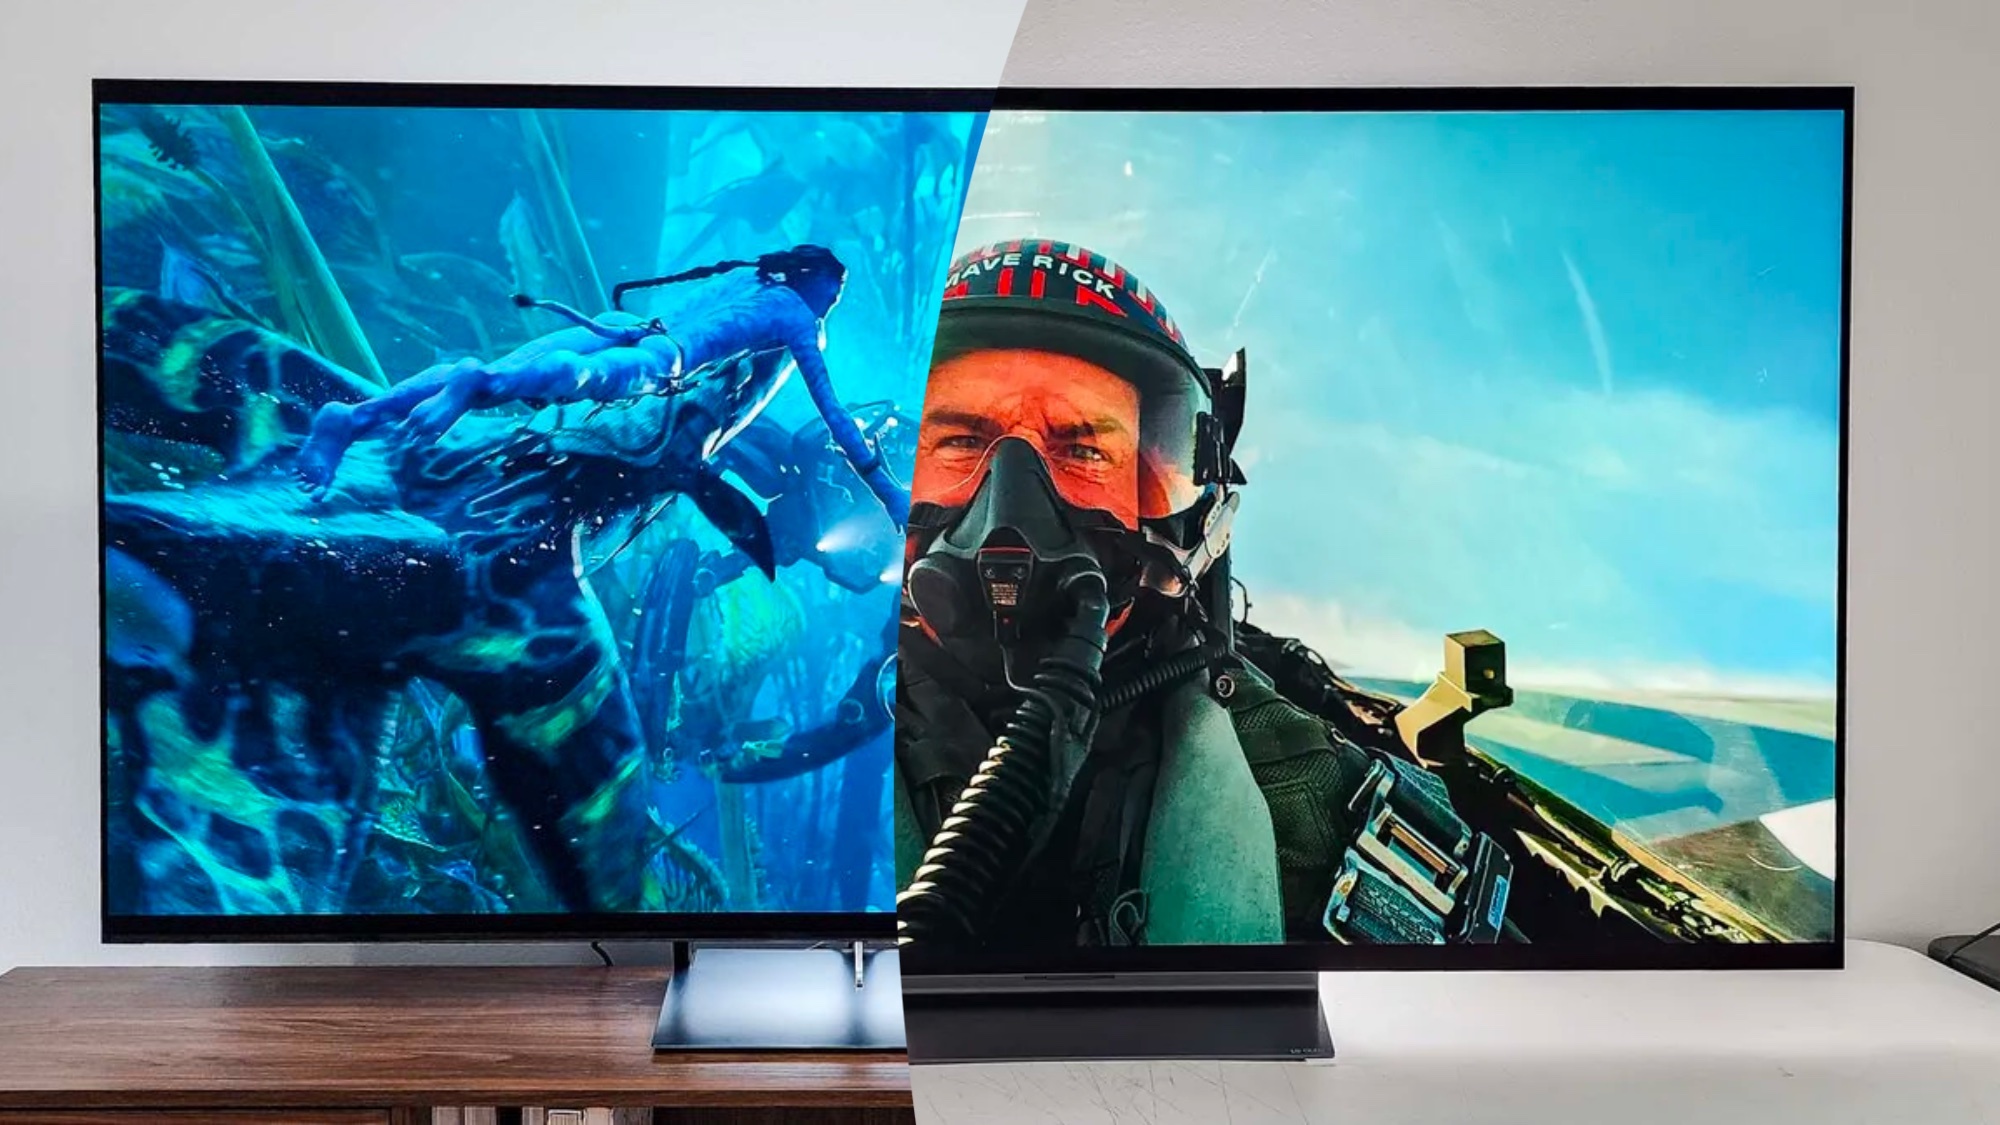 Upcoming LG TVs will address one of OLED's biggest flaws